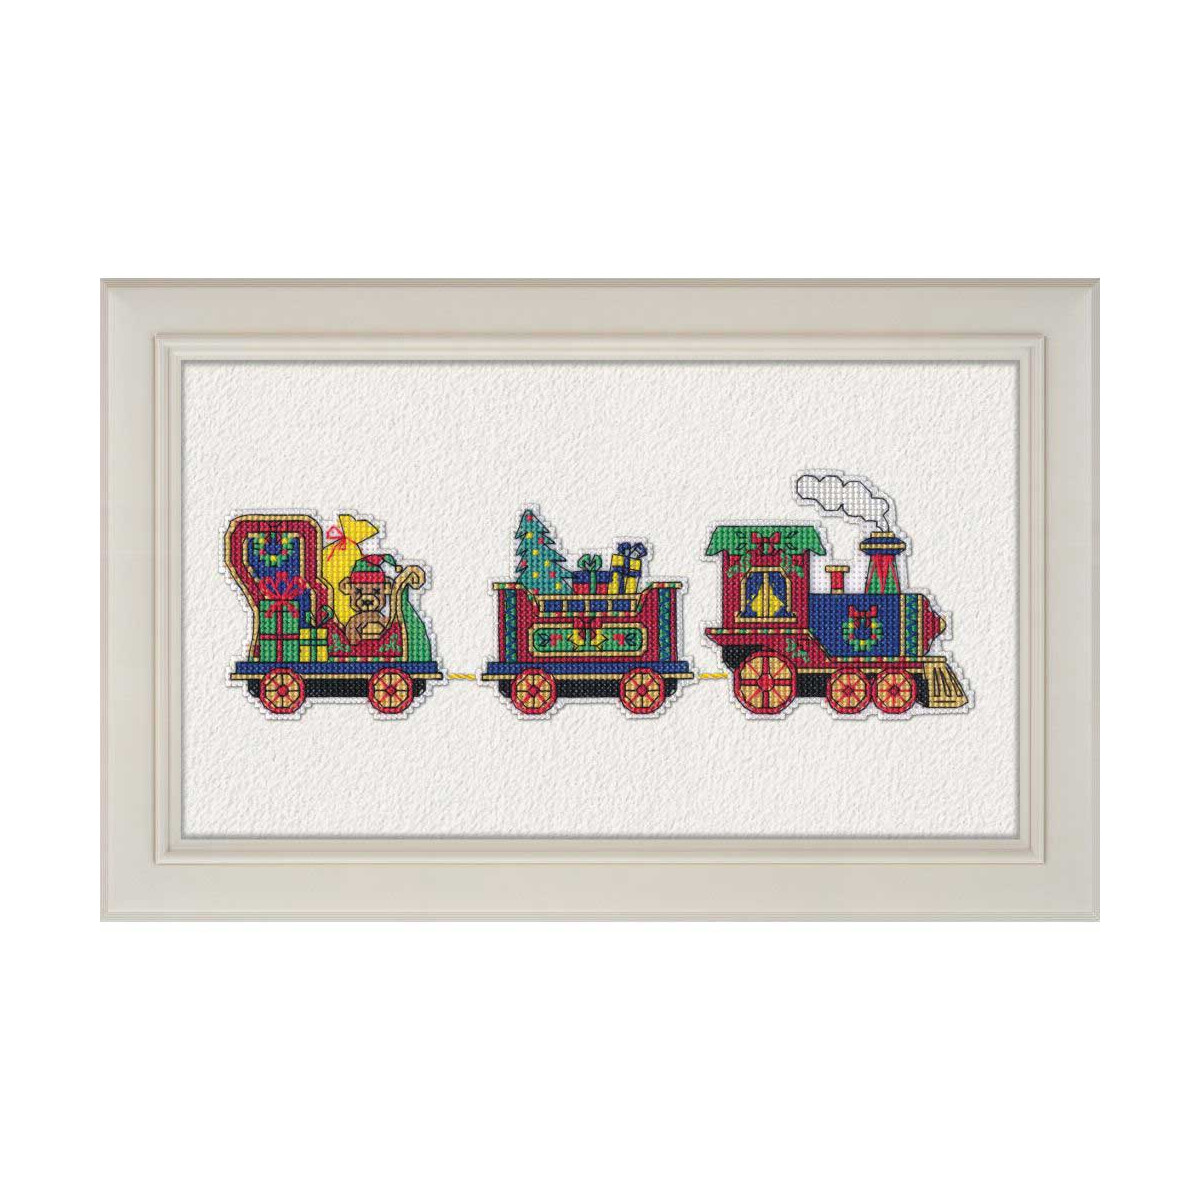 Oven counted cross stitch kit "Magnet. Christmas...